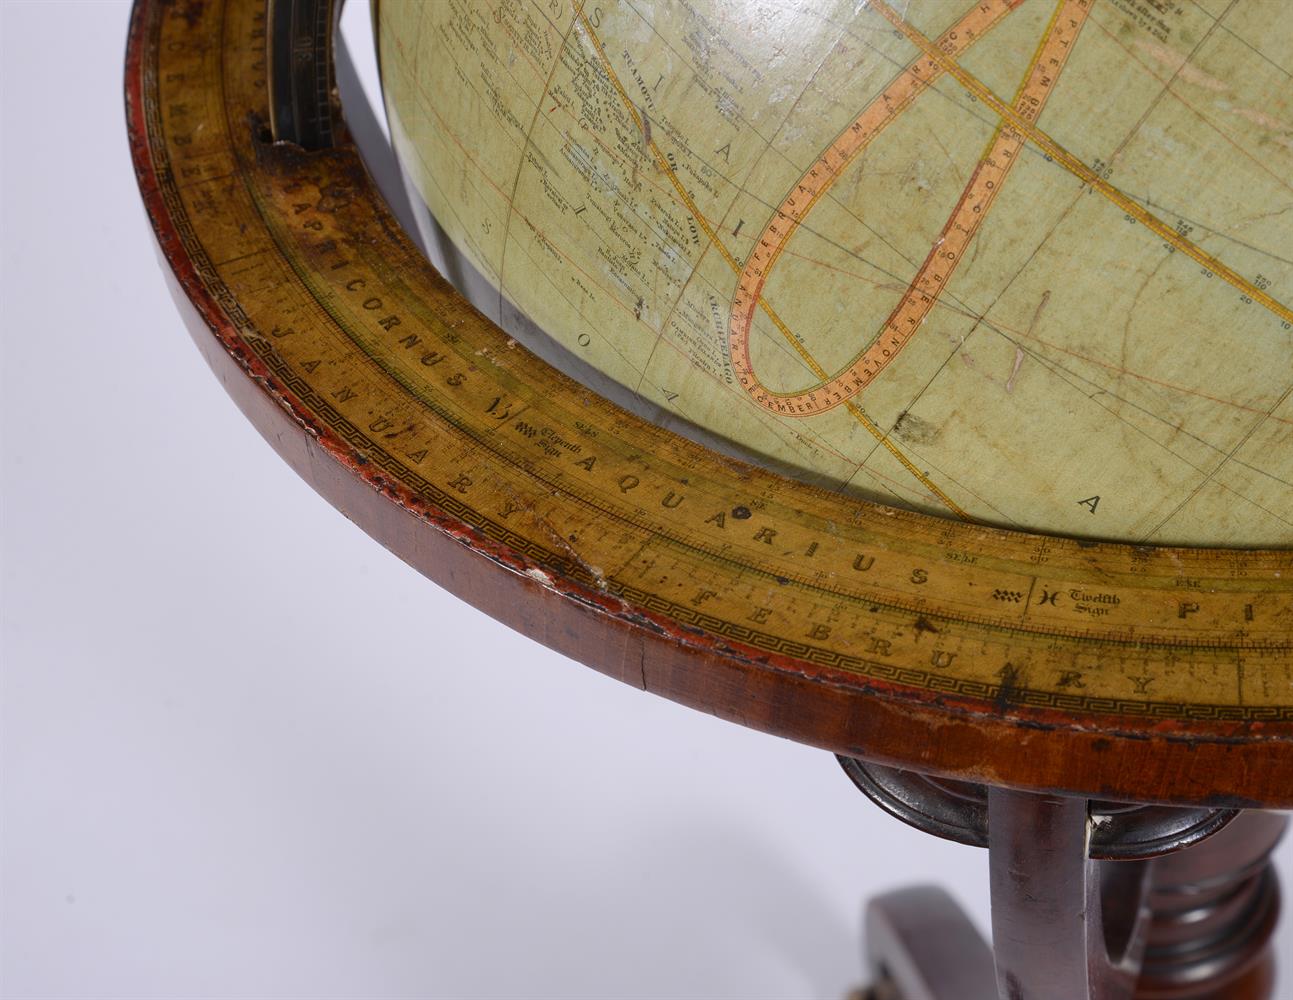 AN AMERICAN EIGHTEEN-INCH TERRESTRIAL LIBRARY GLOBE, LATE 19TH CENTURY - Image 3 of 3